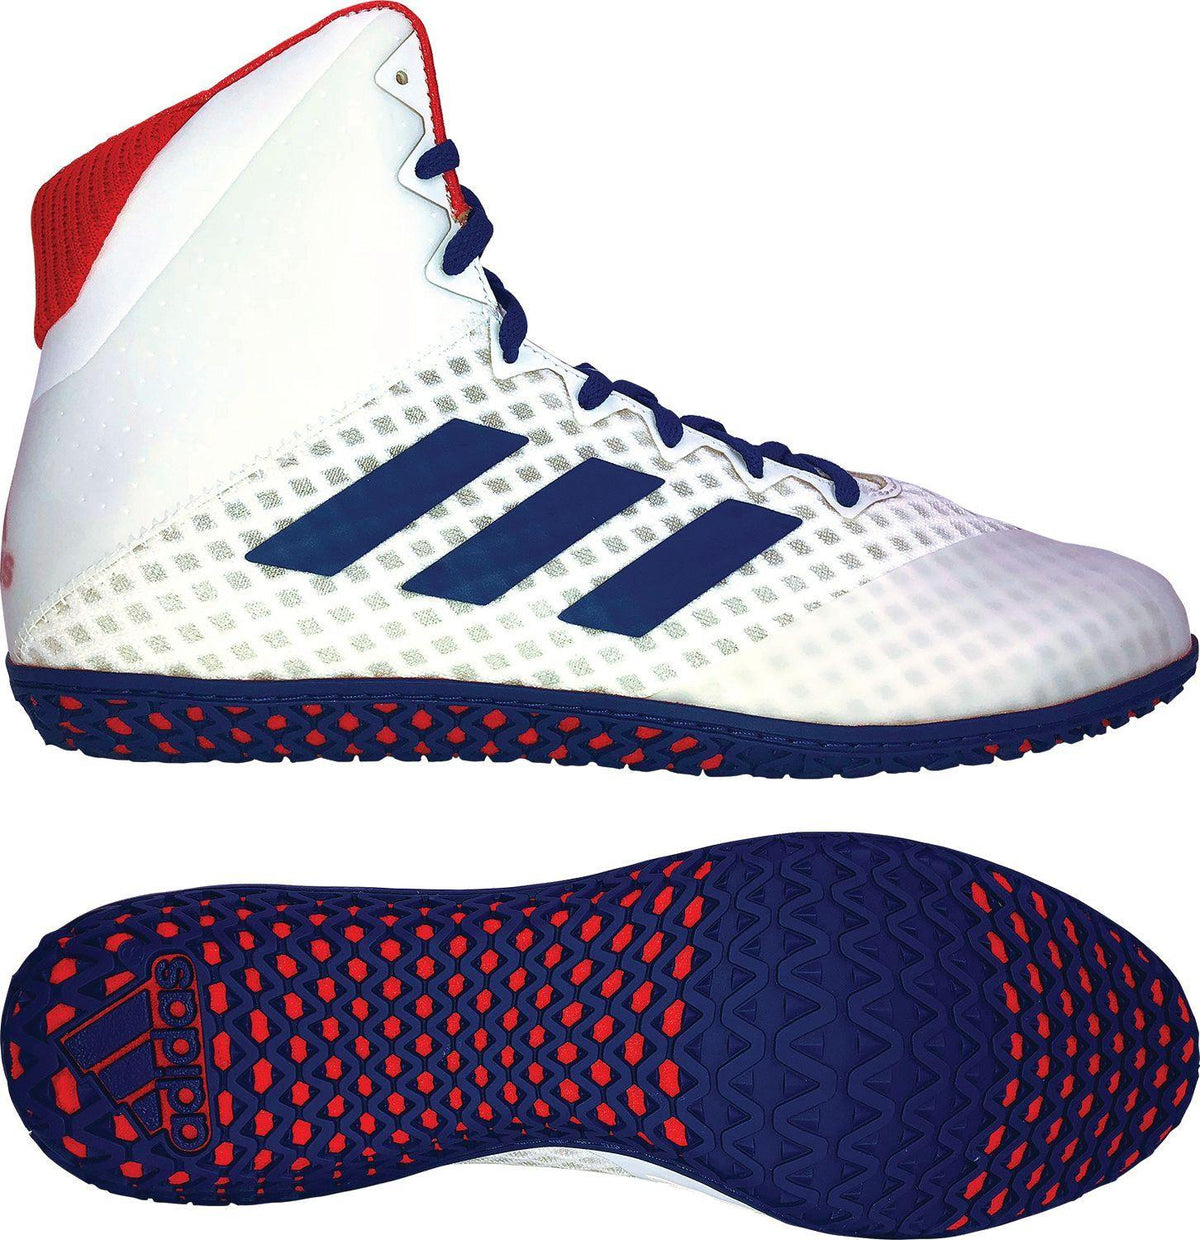 Adidas Red White Blue Wrestling Shoes for Wrestlers 